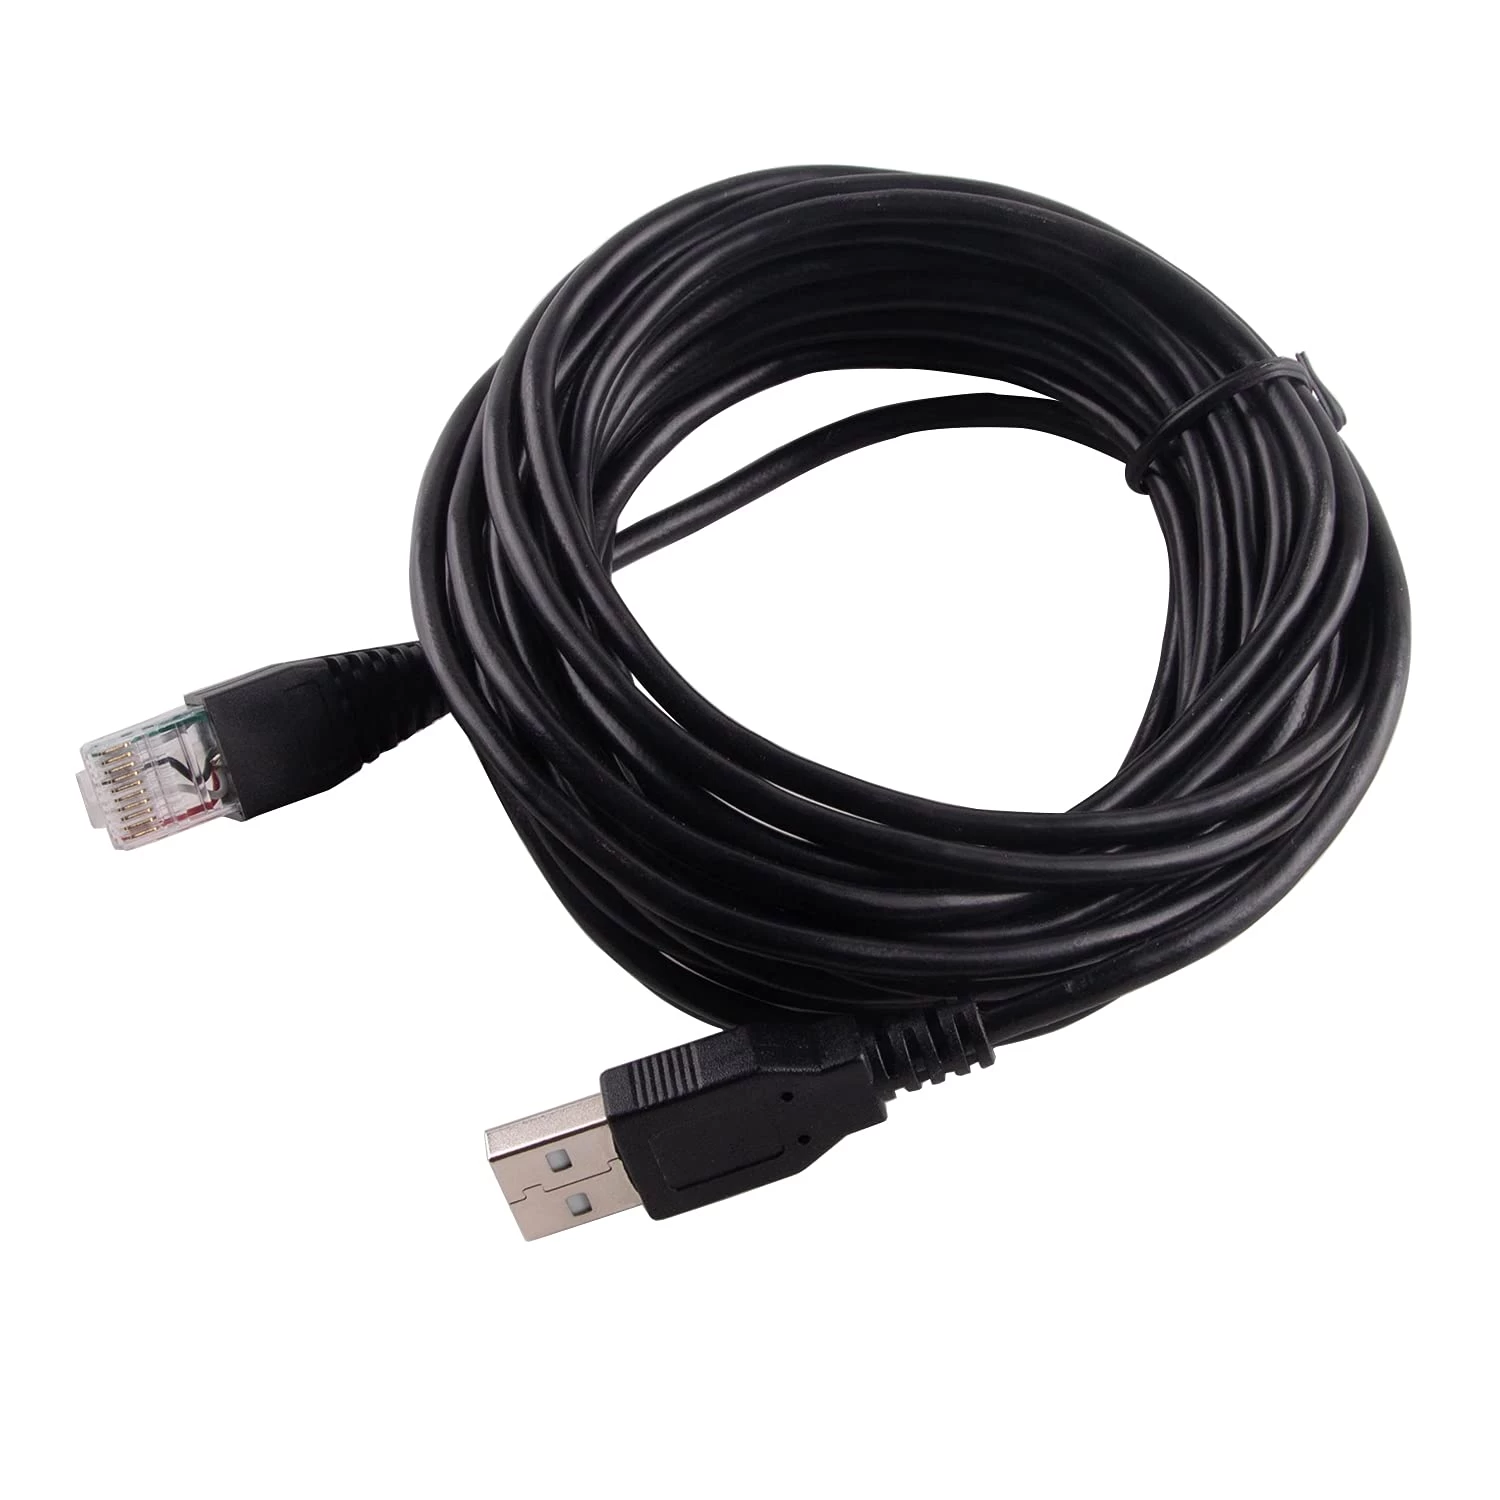 China APC Cable USB to RJ50 Control Cable for Smart UPS manufacturer